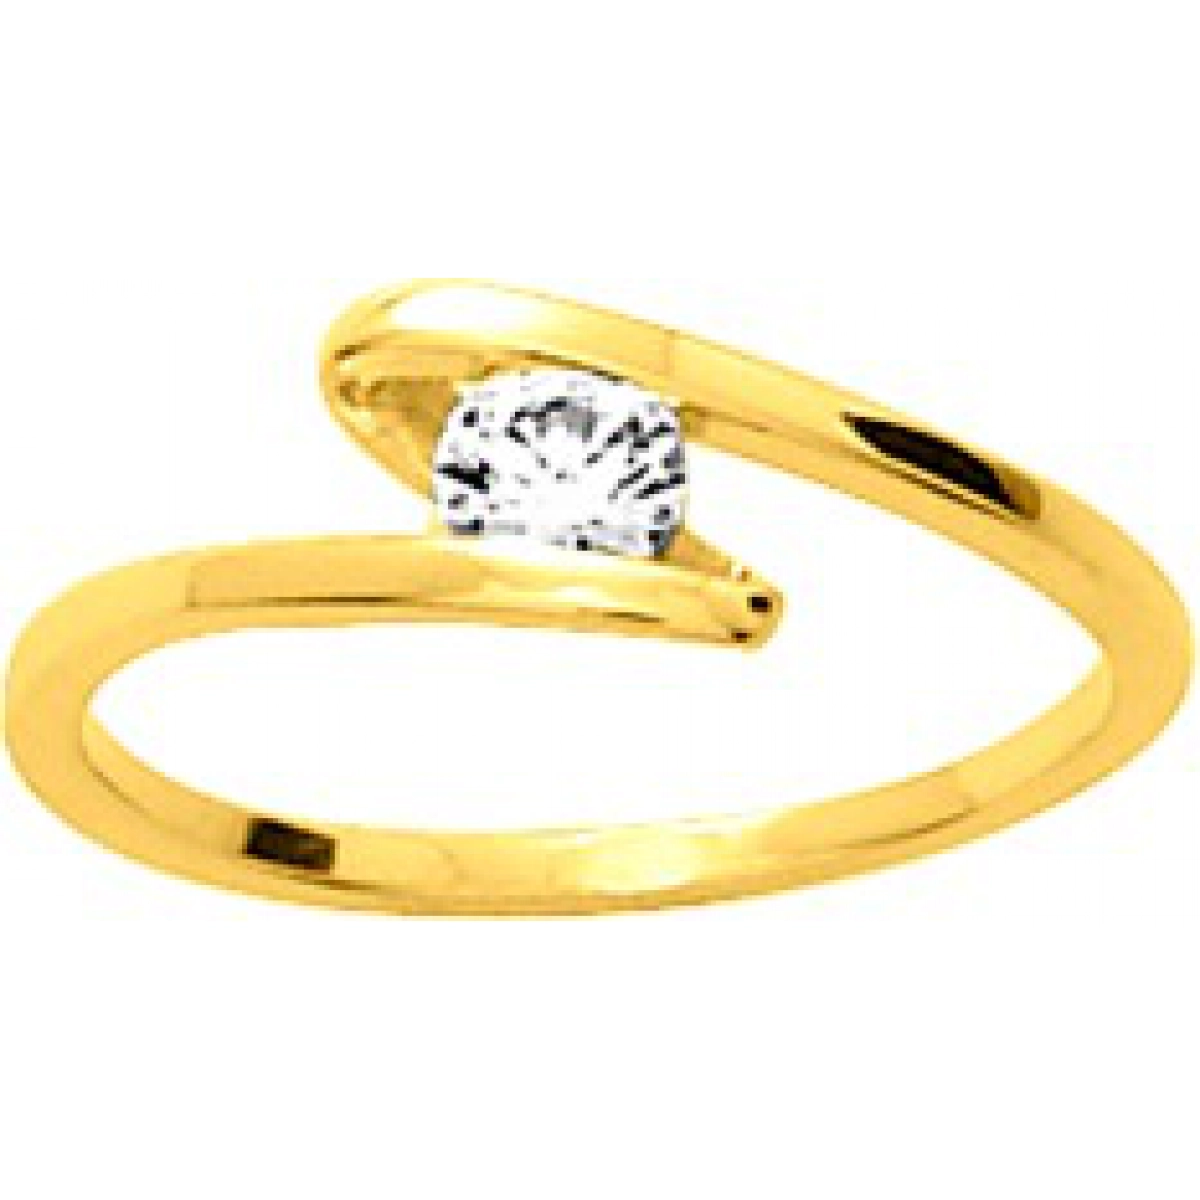 Ring w. cz gold plated Brass Lua Blanca  220944.9 - Size 55